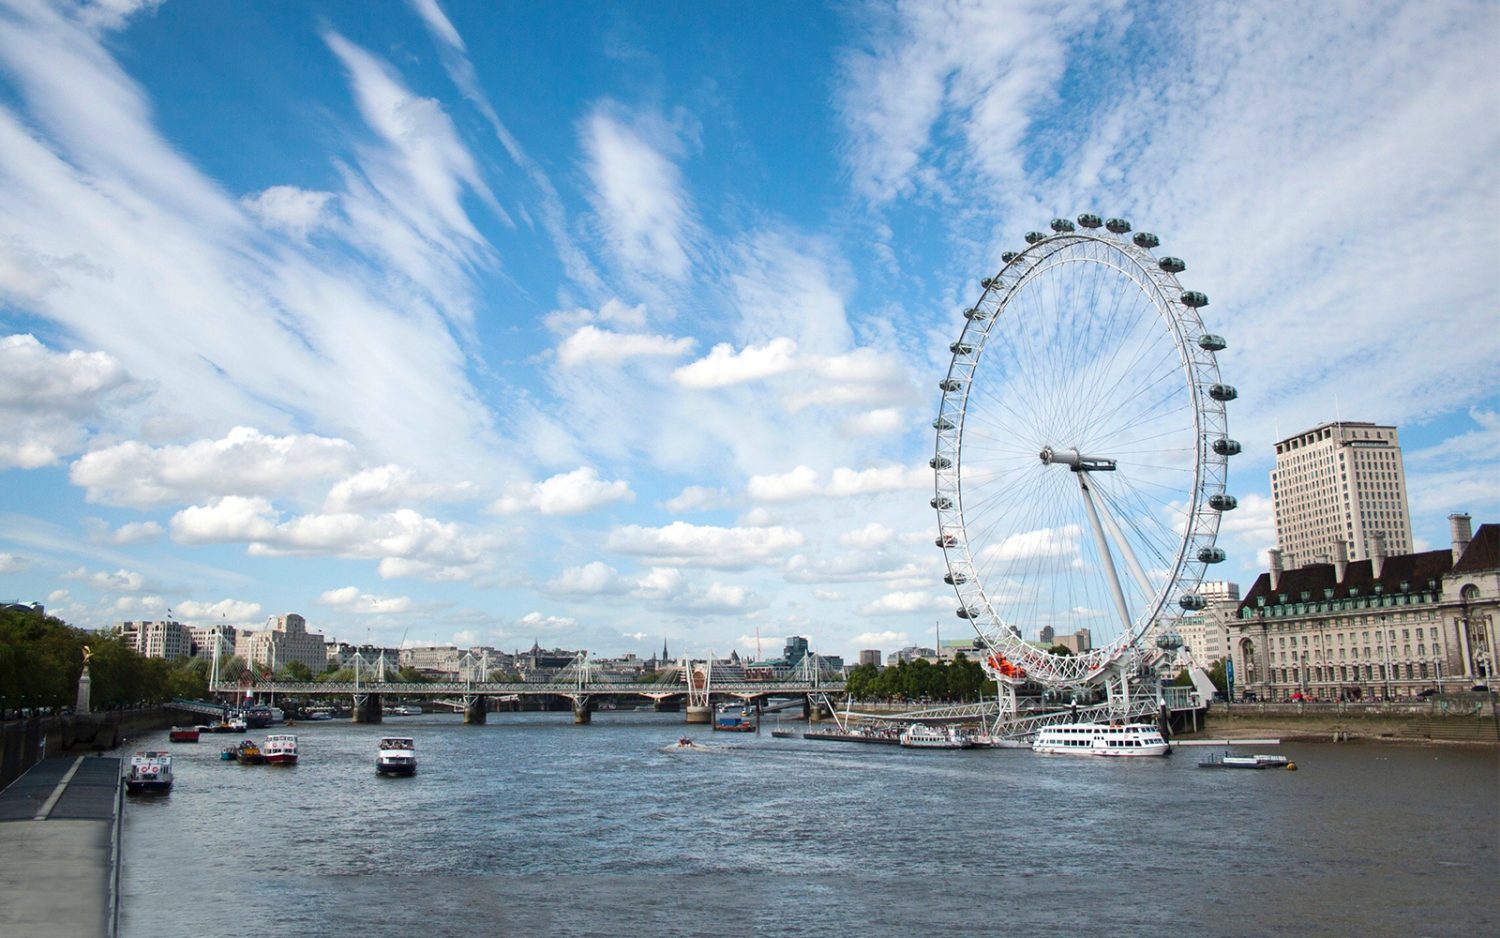 river cruise and london eye tickets